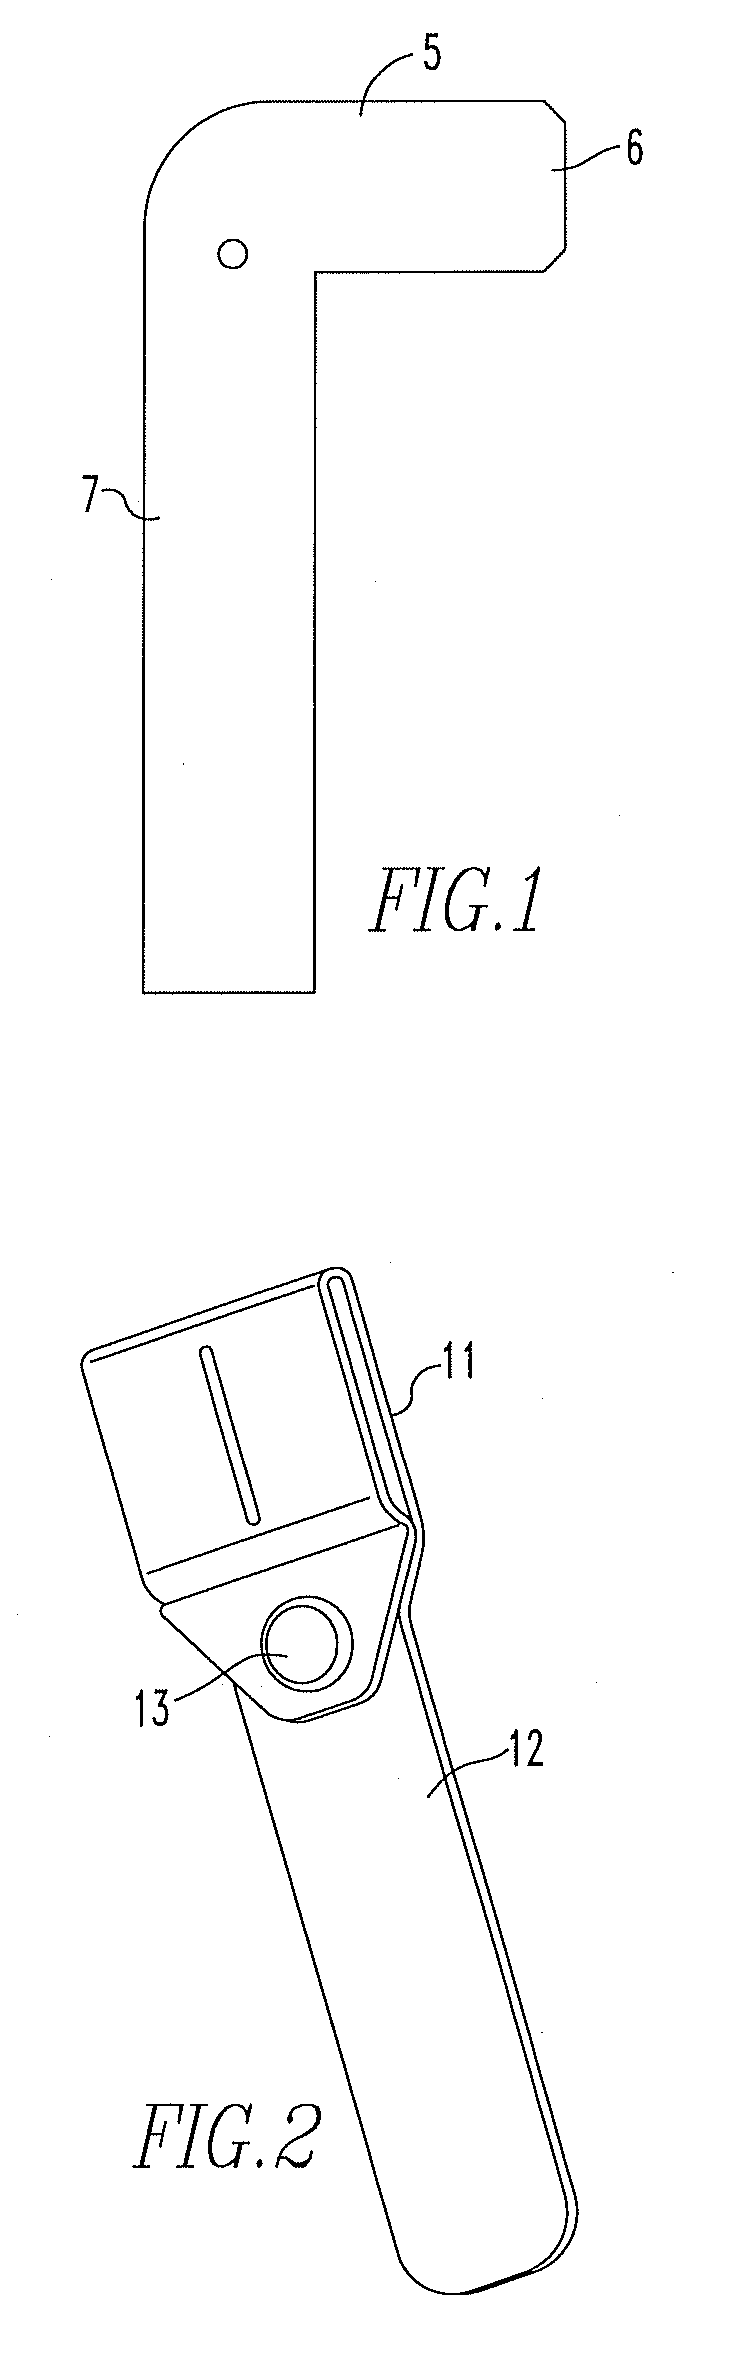 Integrated module connection for HEV battery